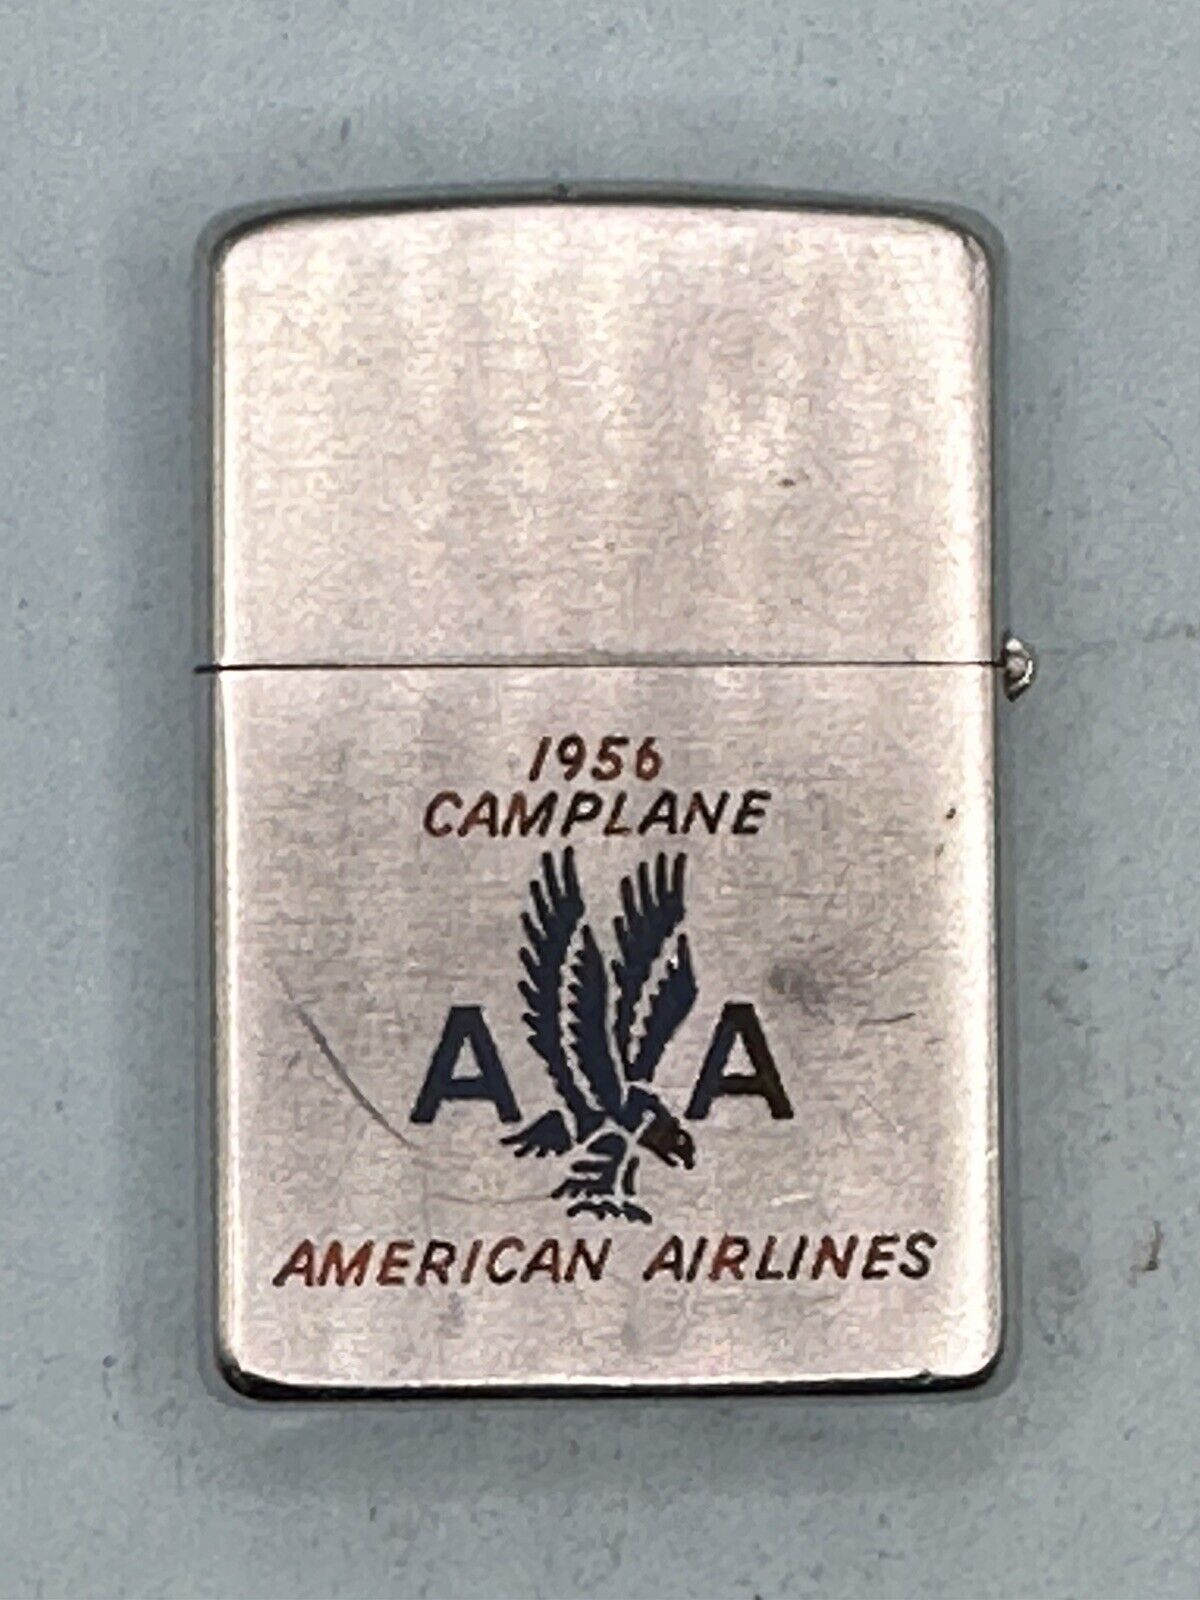 Vintage 1958 American Airlines 1956 Camplane Chrome Zippo Lighter